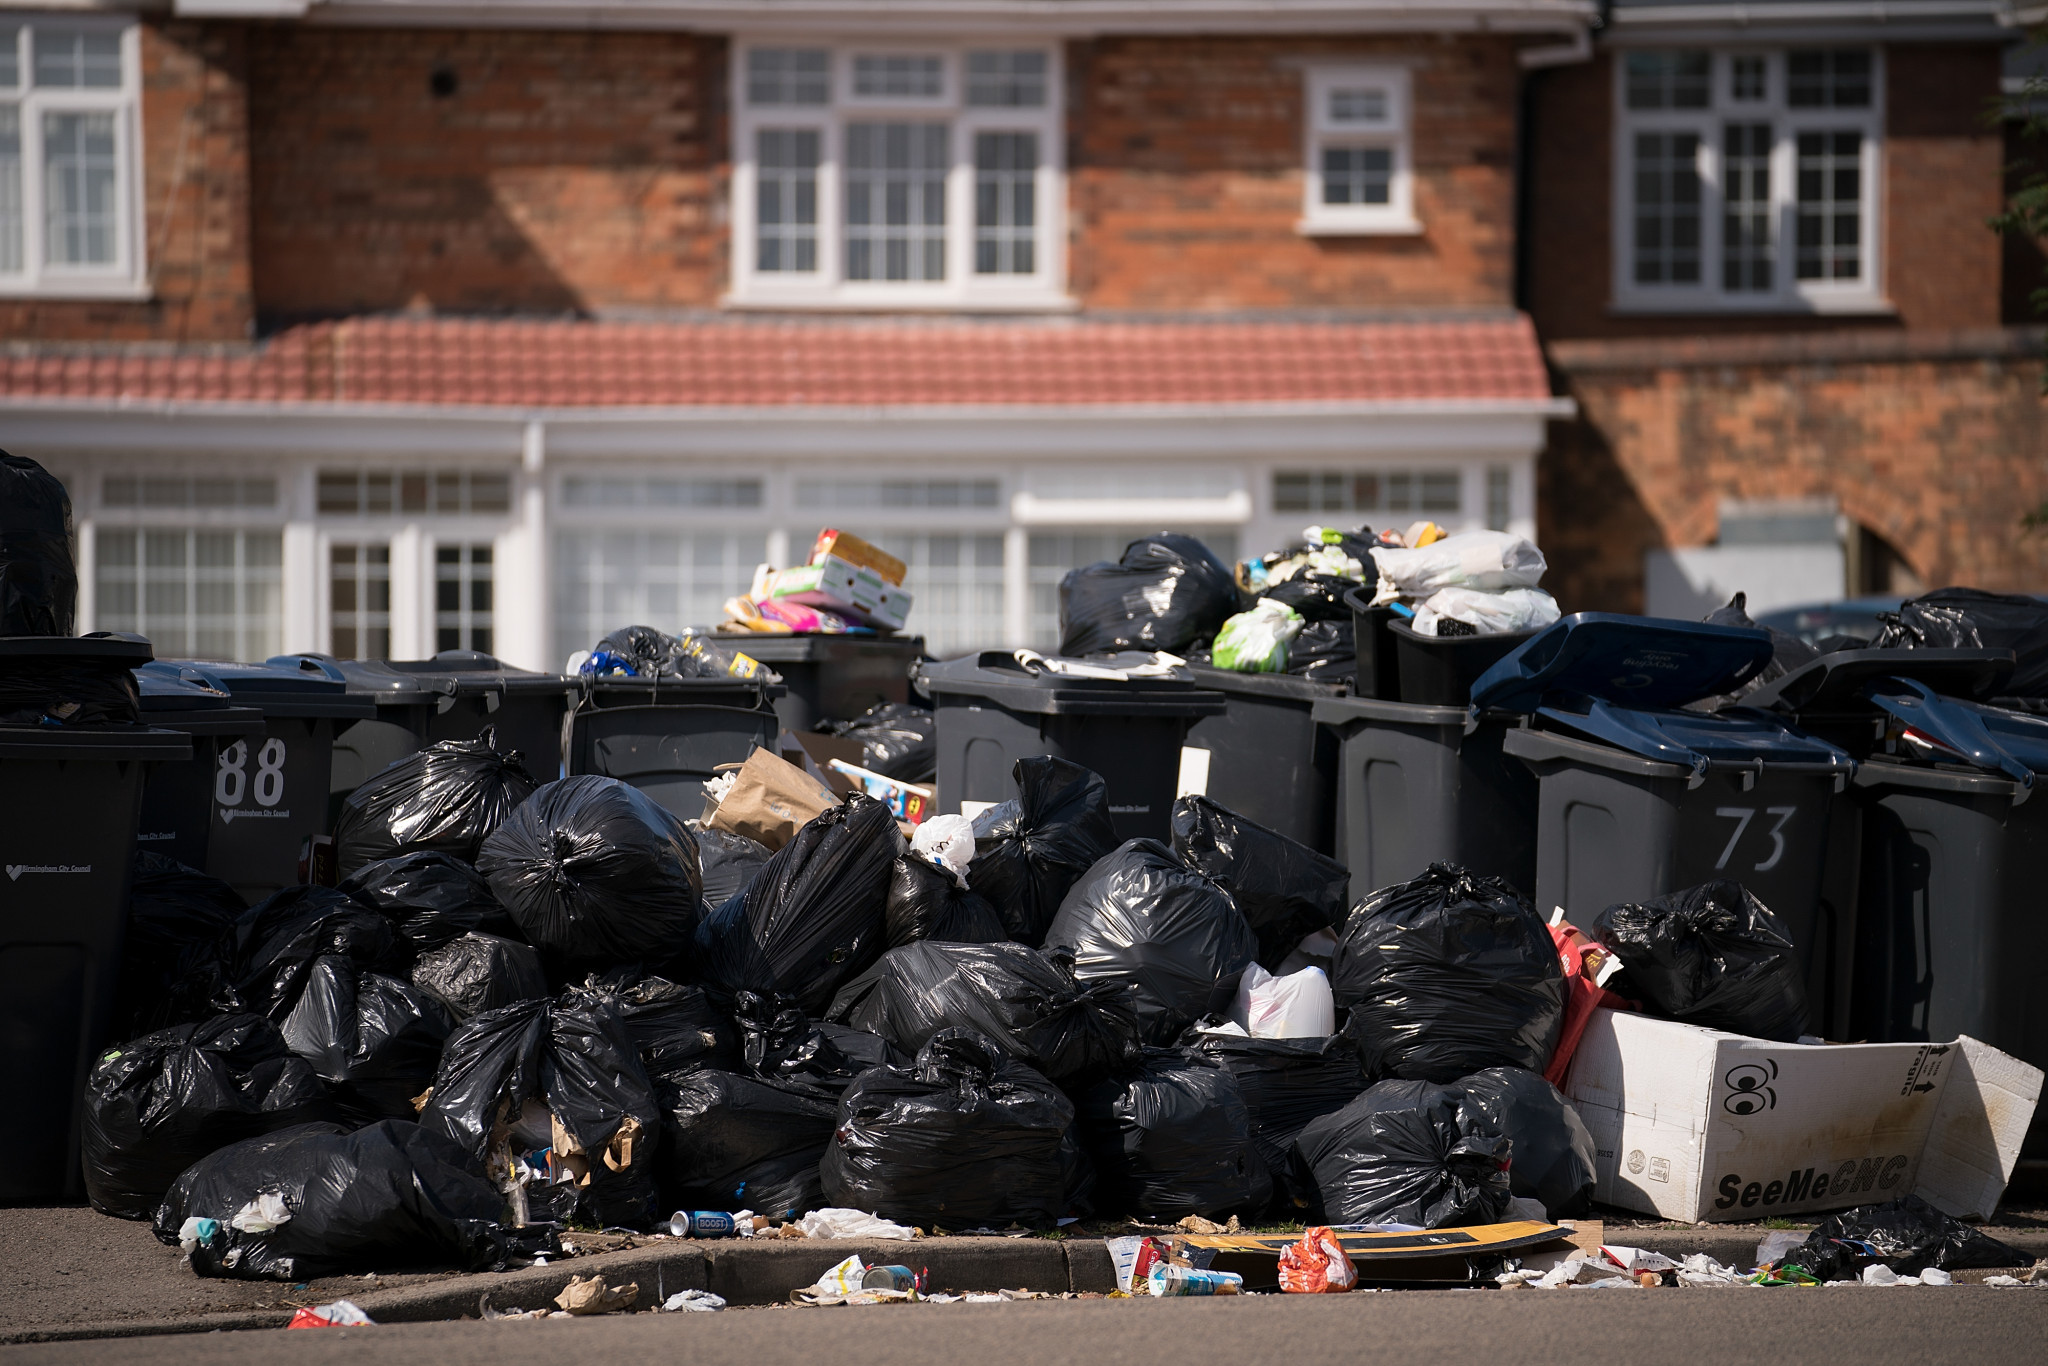 Rubbish has piled up in the streets of Birmingham because of a strike by refuse workers after the City Council cut services by £5 million as part of budget cuts ©Getty Images